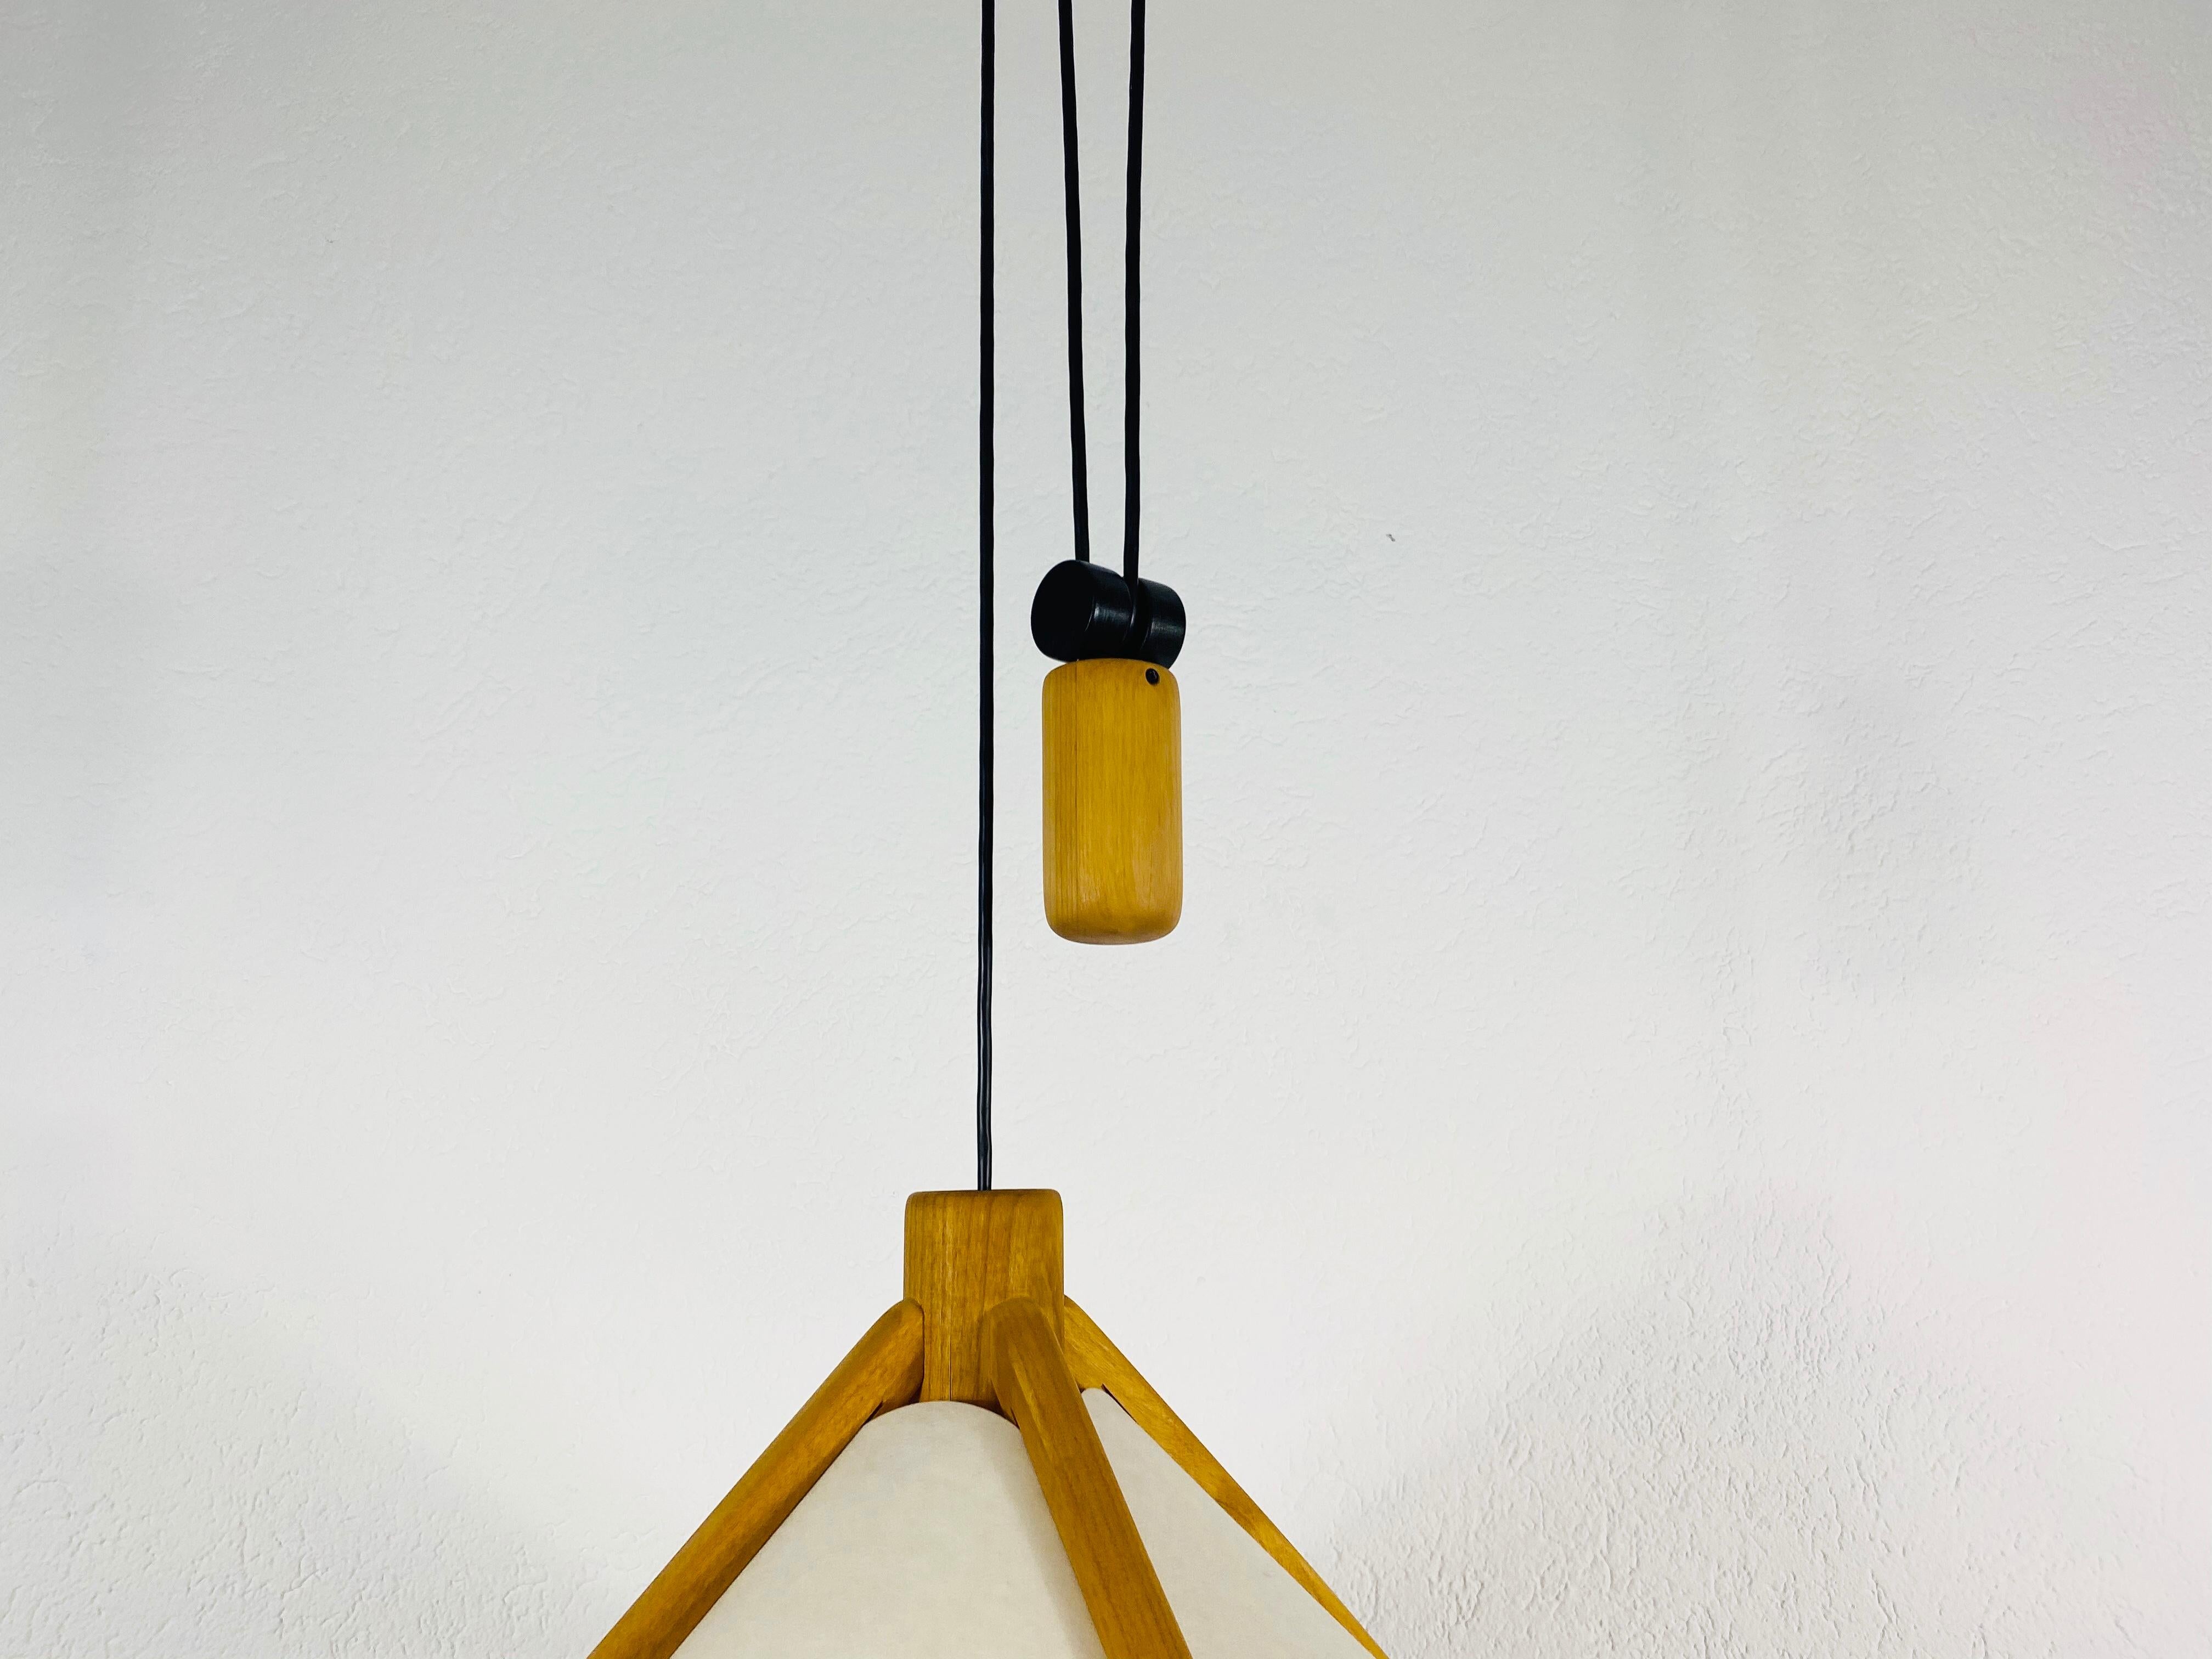 Mid-Century Modern Adjustable Midcentury Wooden Pendant Lamp with Counterweight by Domus, 1960s